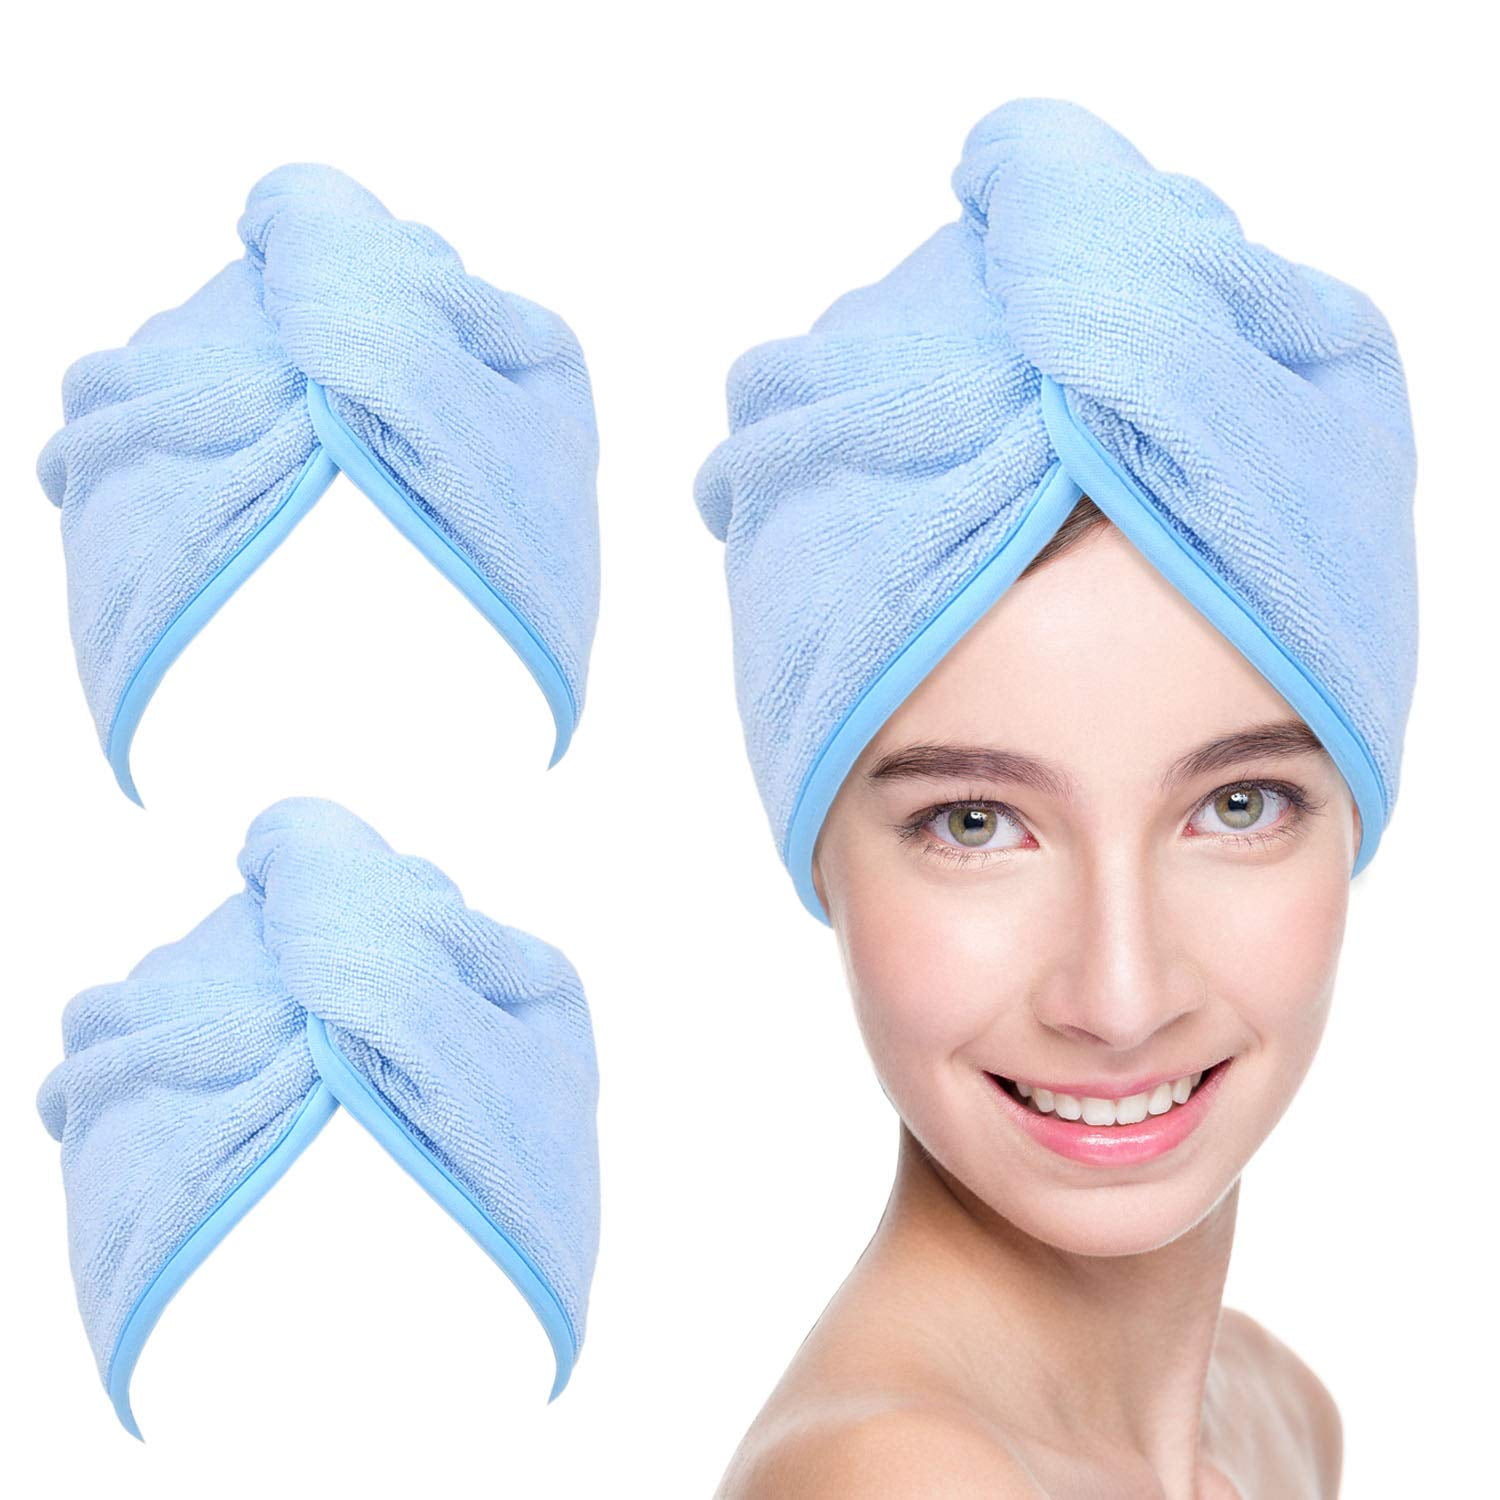 Details about   5 Pack Hair Drying Caps Microfiber Extreme Soft  Ultra Absorbent Fast Drying 